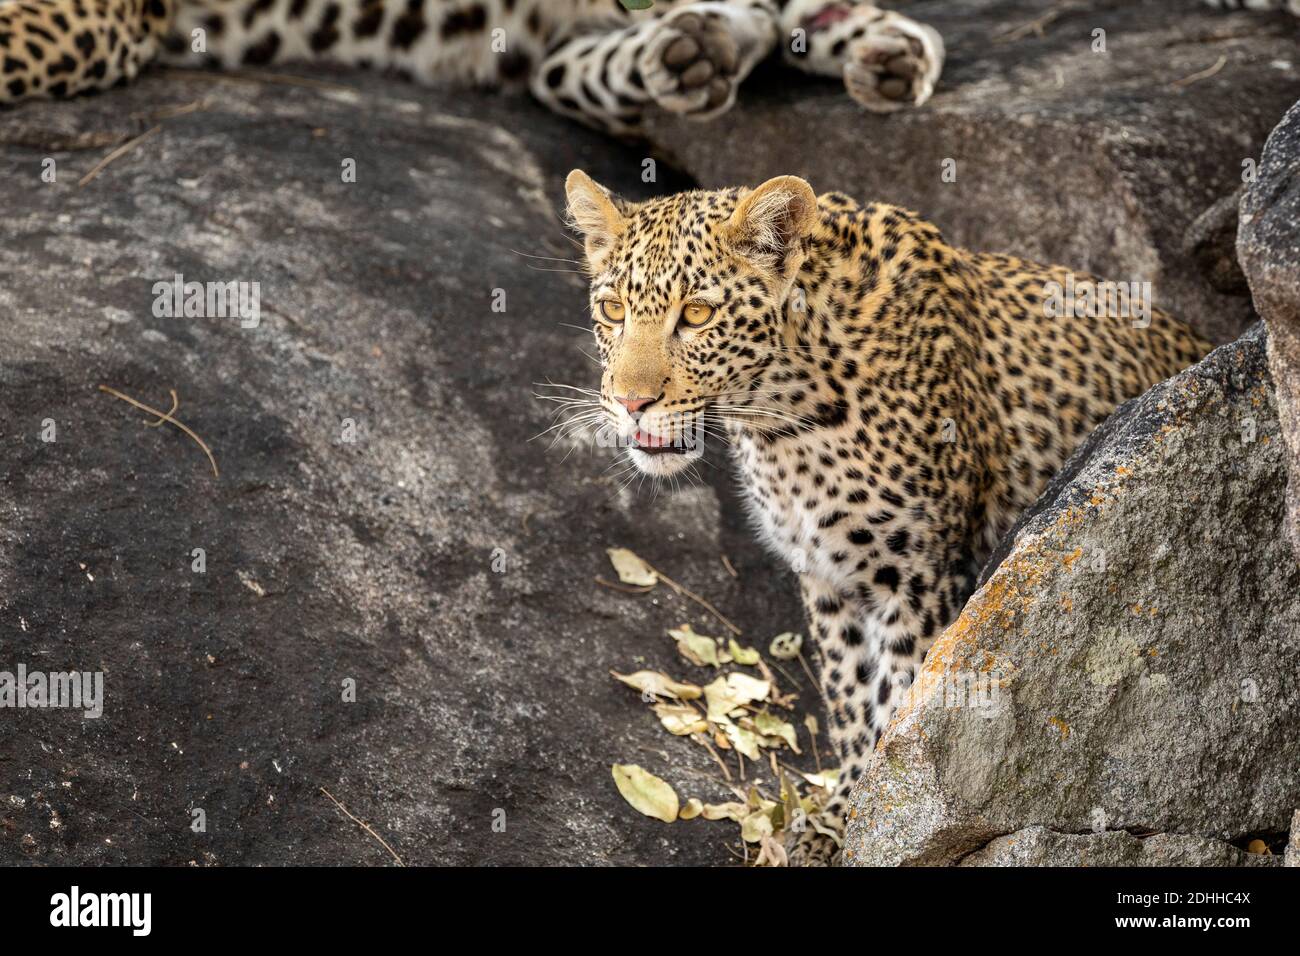 Young leopard with big eyes looking alert sitting on large rocks in Kruger Park in South Africa Stock Photo